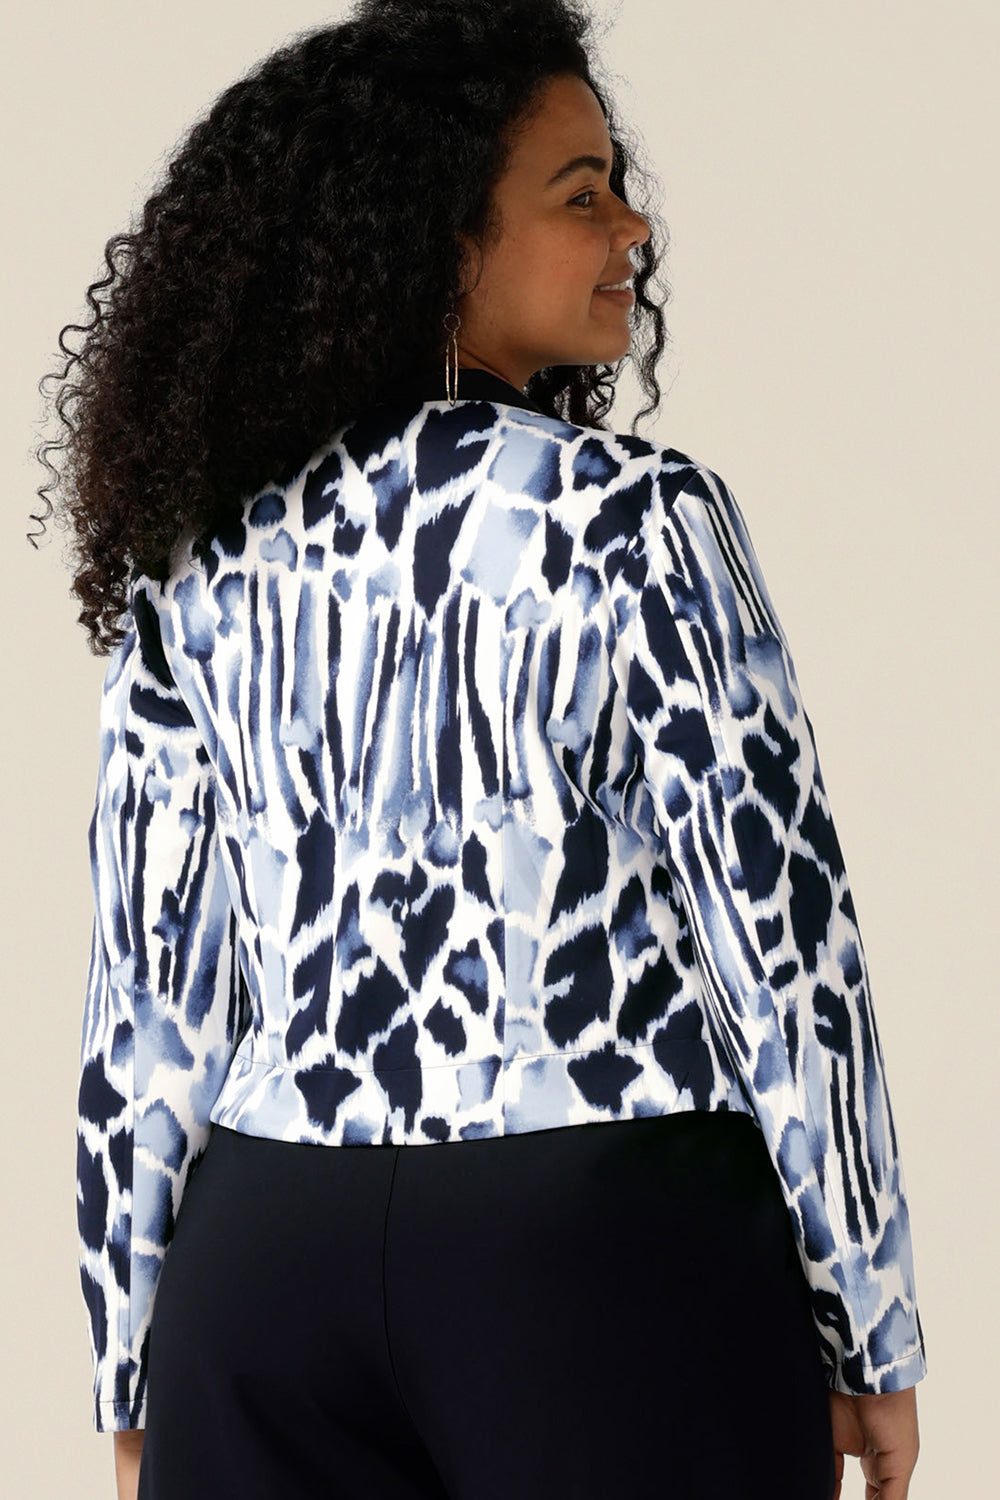 A size 12, curvy woman wears a collarless open front jacket for work and corporate wear. In navy and white jersey, this is a tailored jacket with stretch for all-day wear as a comfortable office jacket. Made in Australia and shipping to New Zealand, buy this quality work jacket in sizes 8 to size 24.